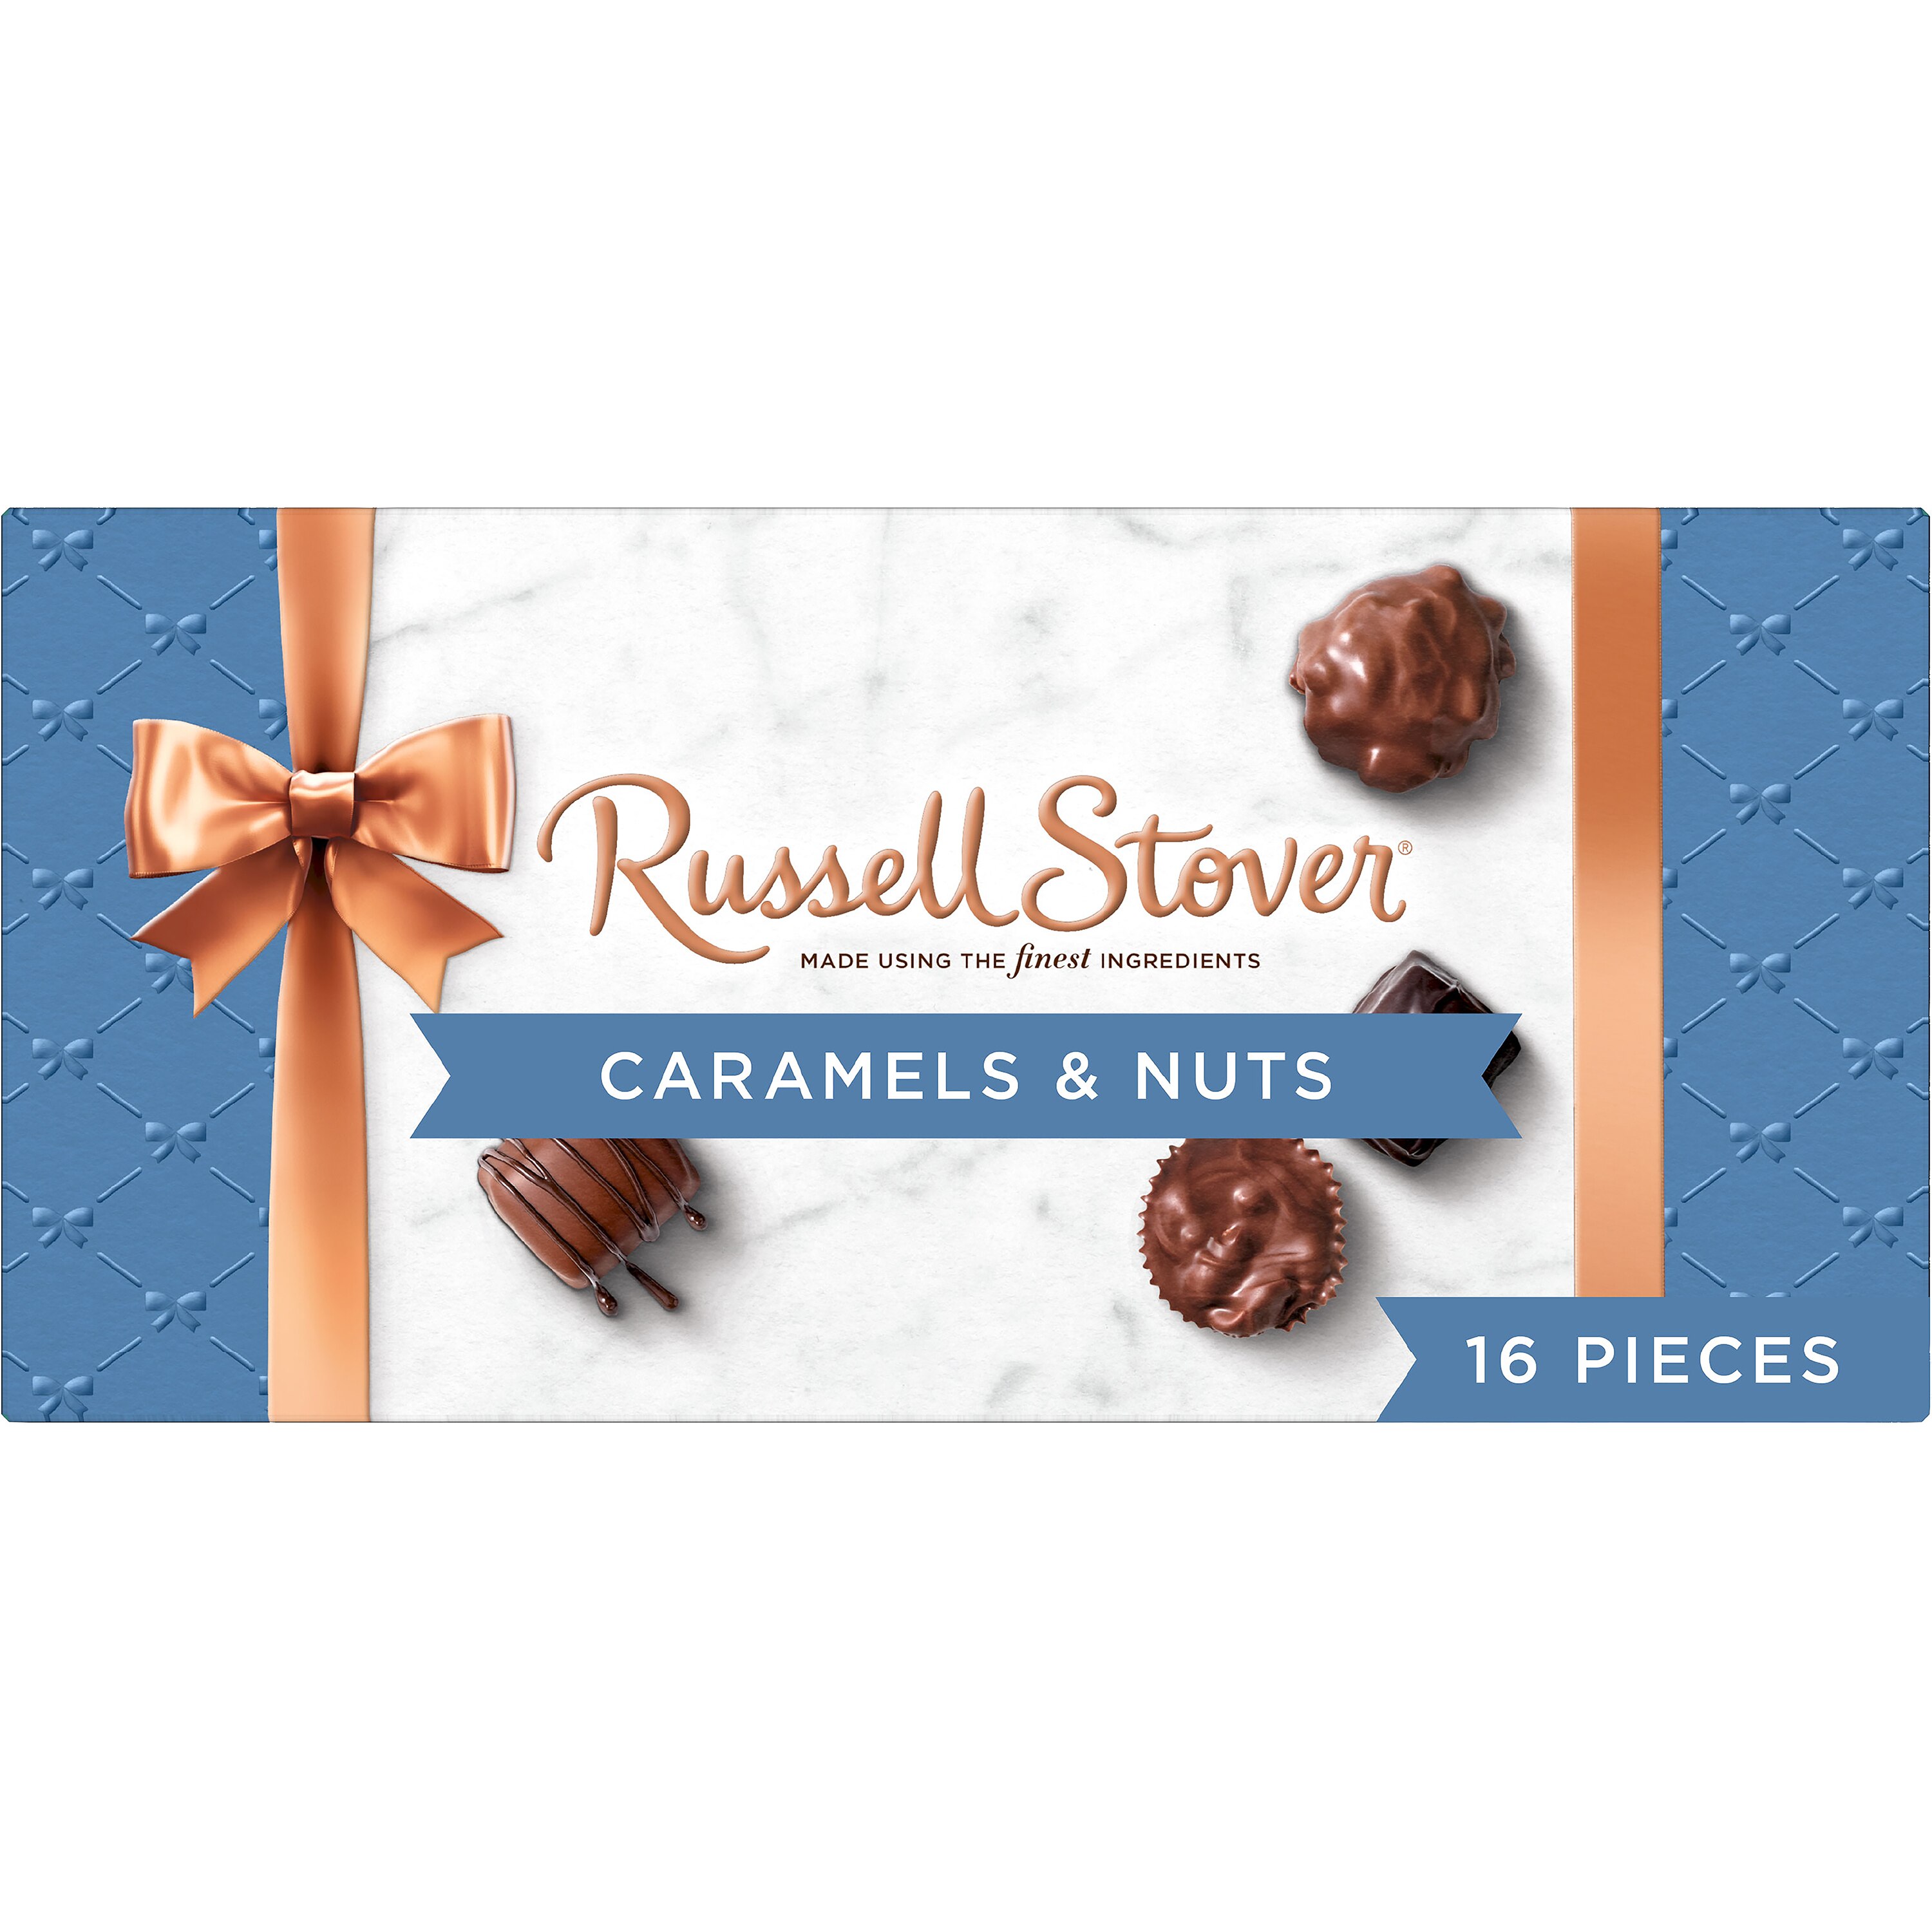 Russell Stover Caramel & Nuts Assortment Gift Box, 9.4 OZ